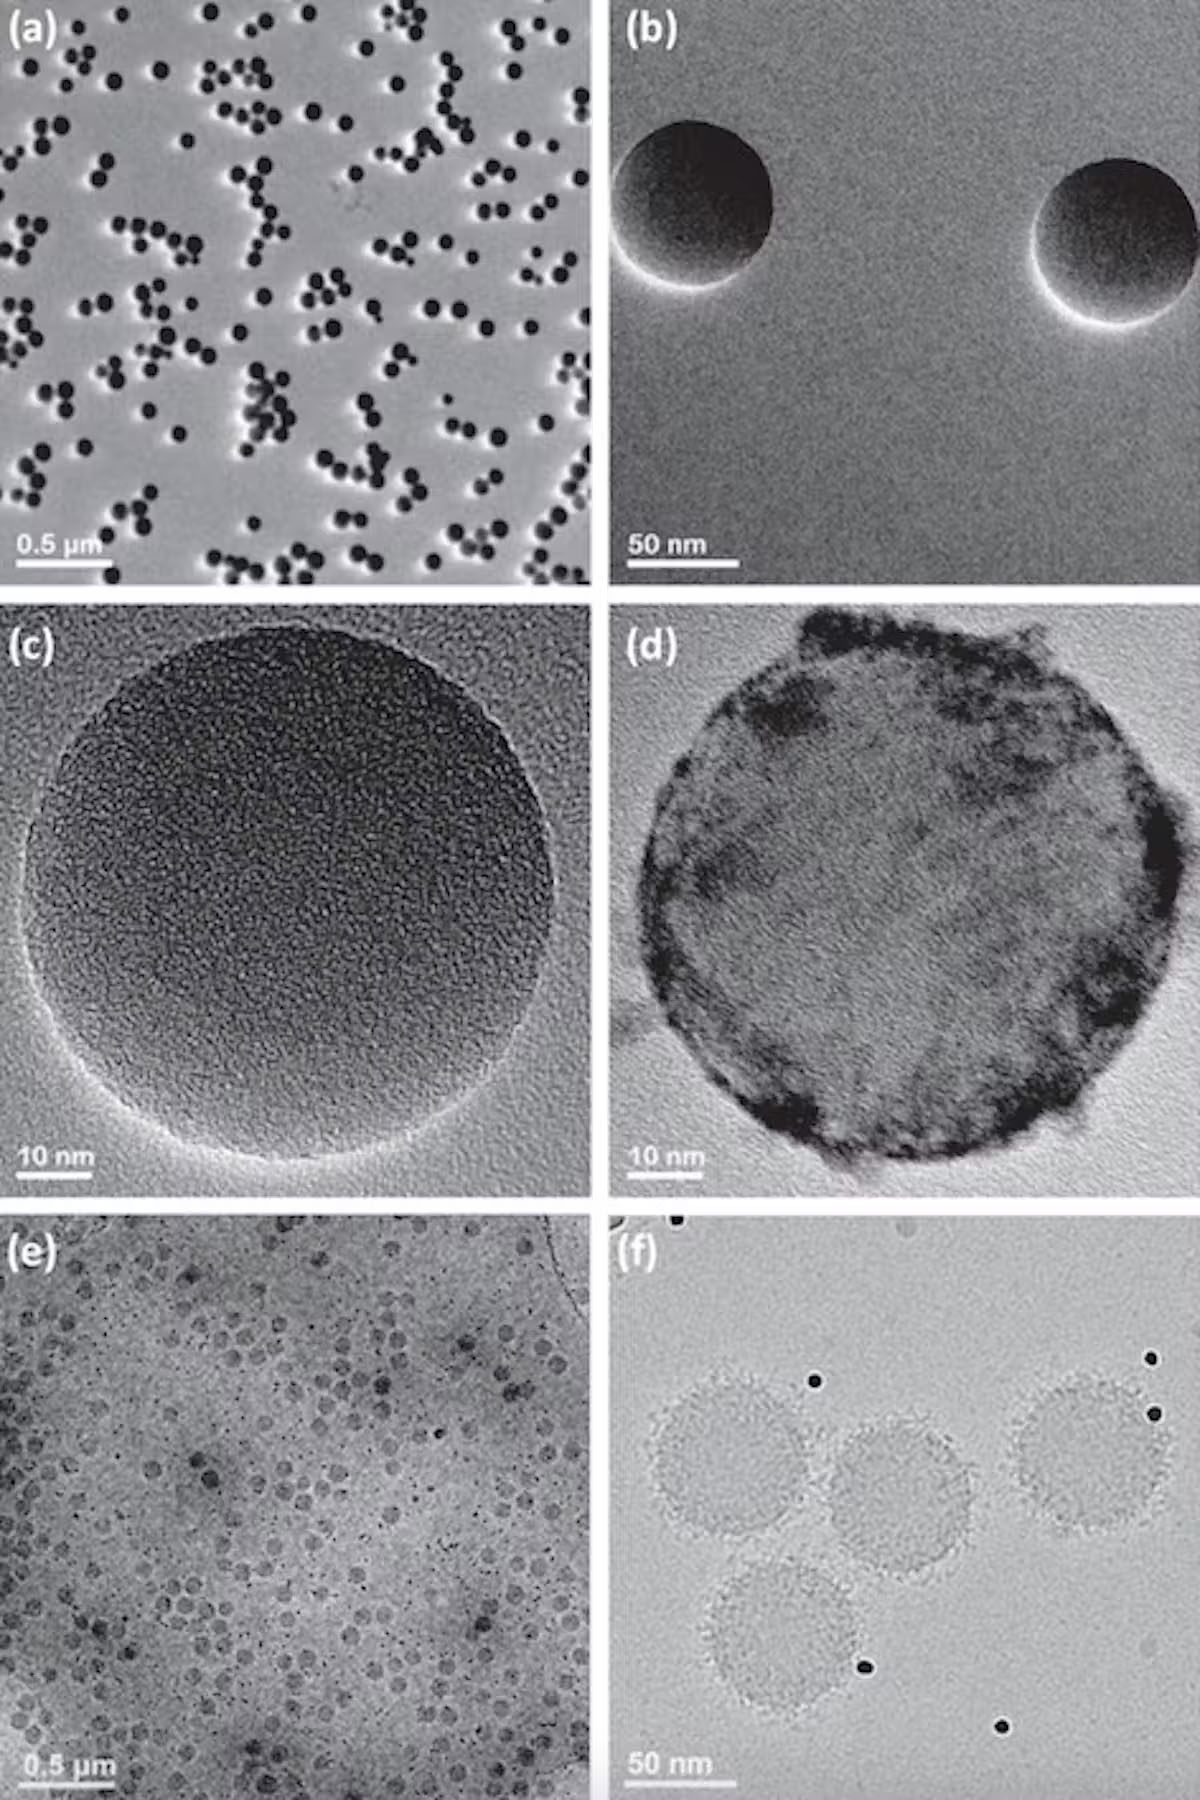 Cryo-electron microscopy images of protein coronas on nanoparticles